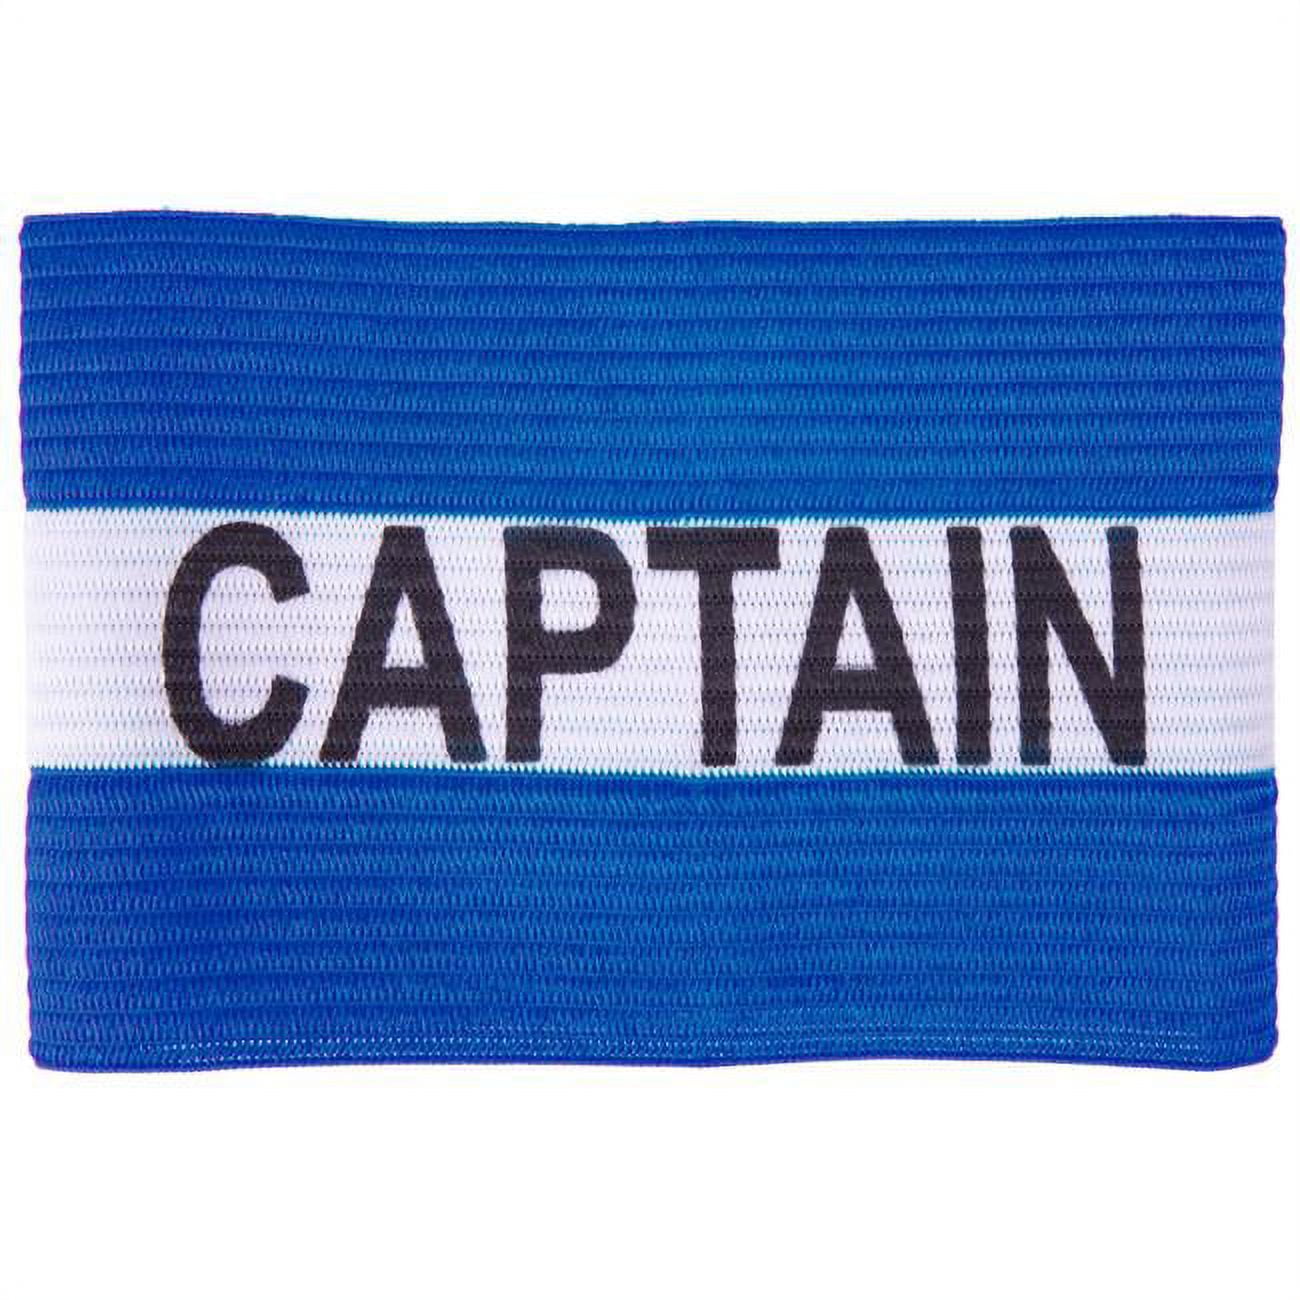 Picture of Brybelly SSCR-803 Captain Armband, Blue - Adult